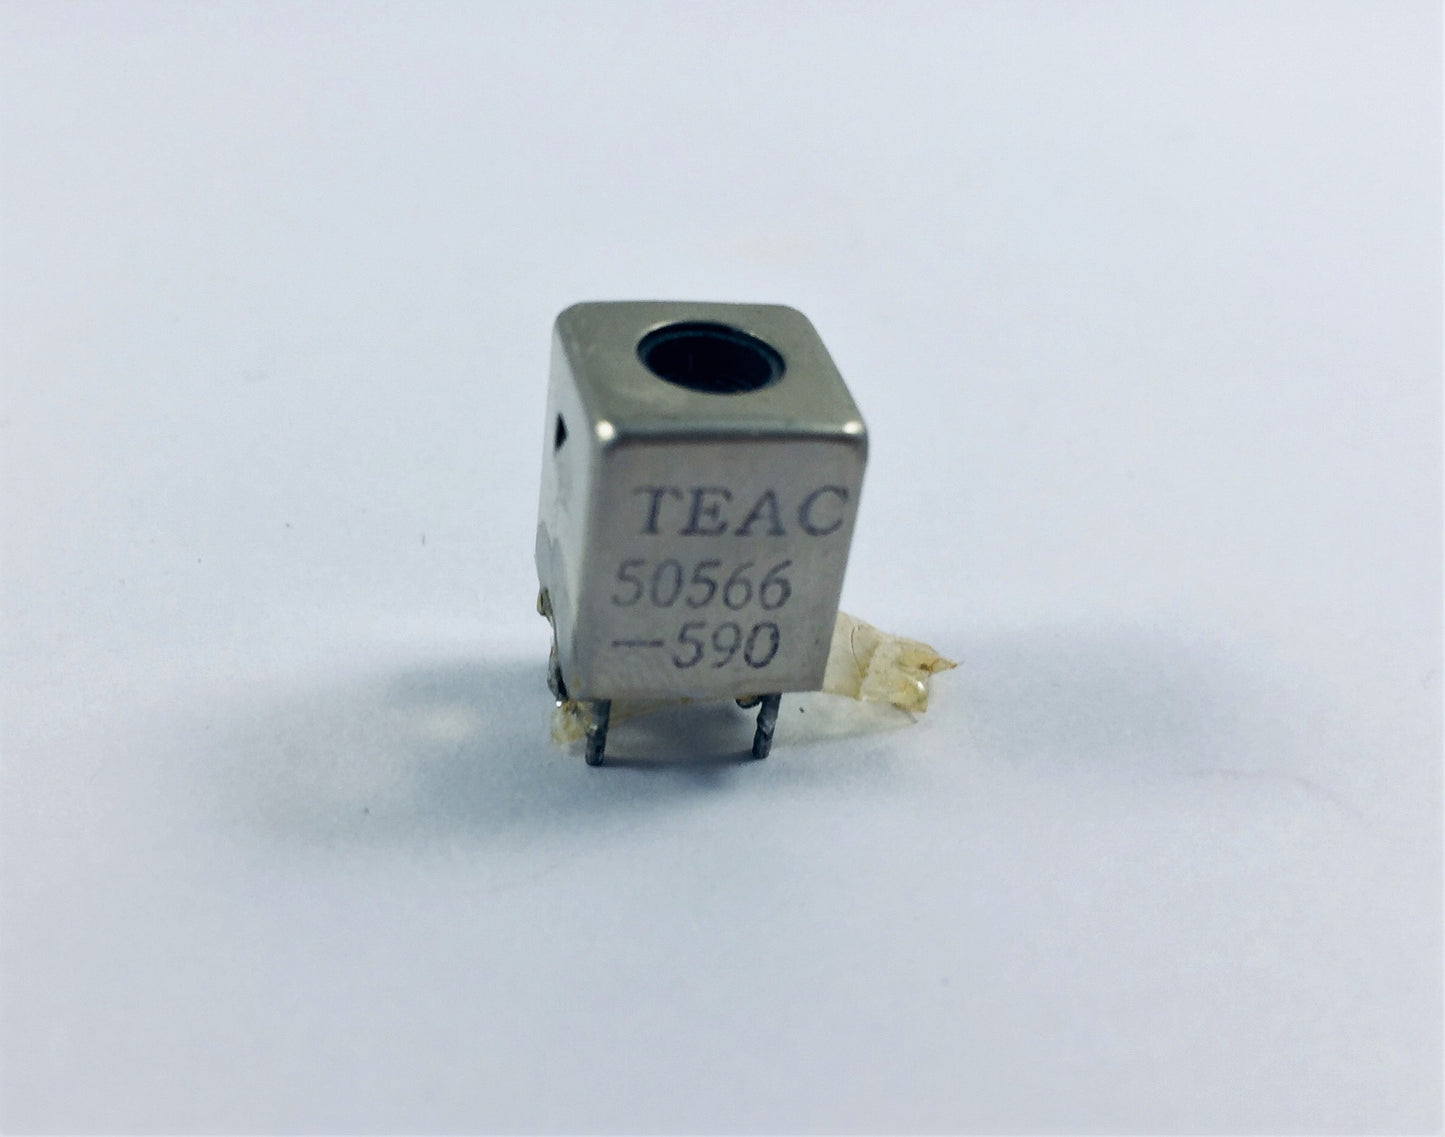 Teac inductor 50566-590